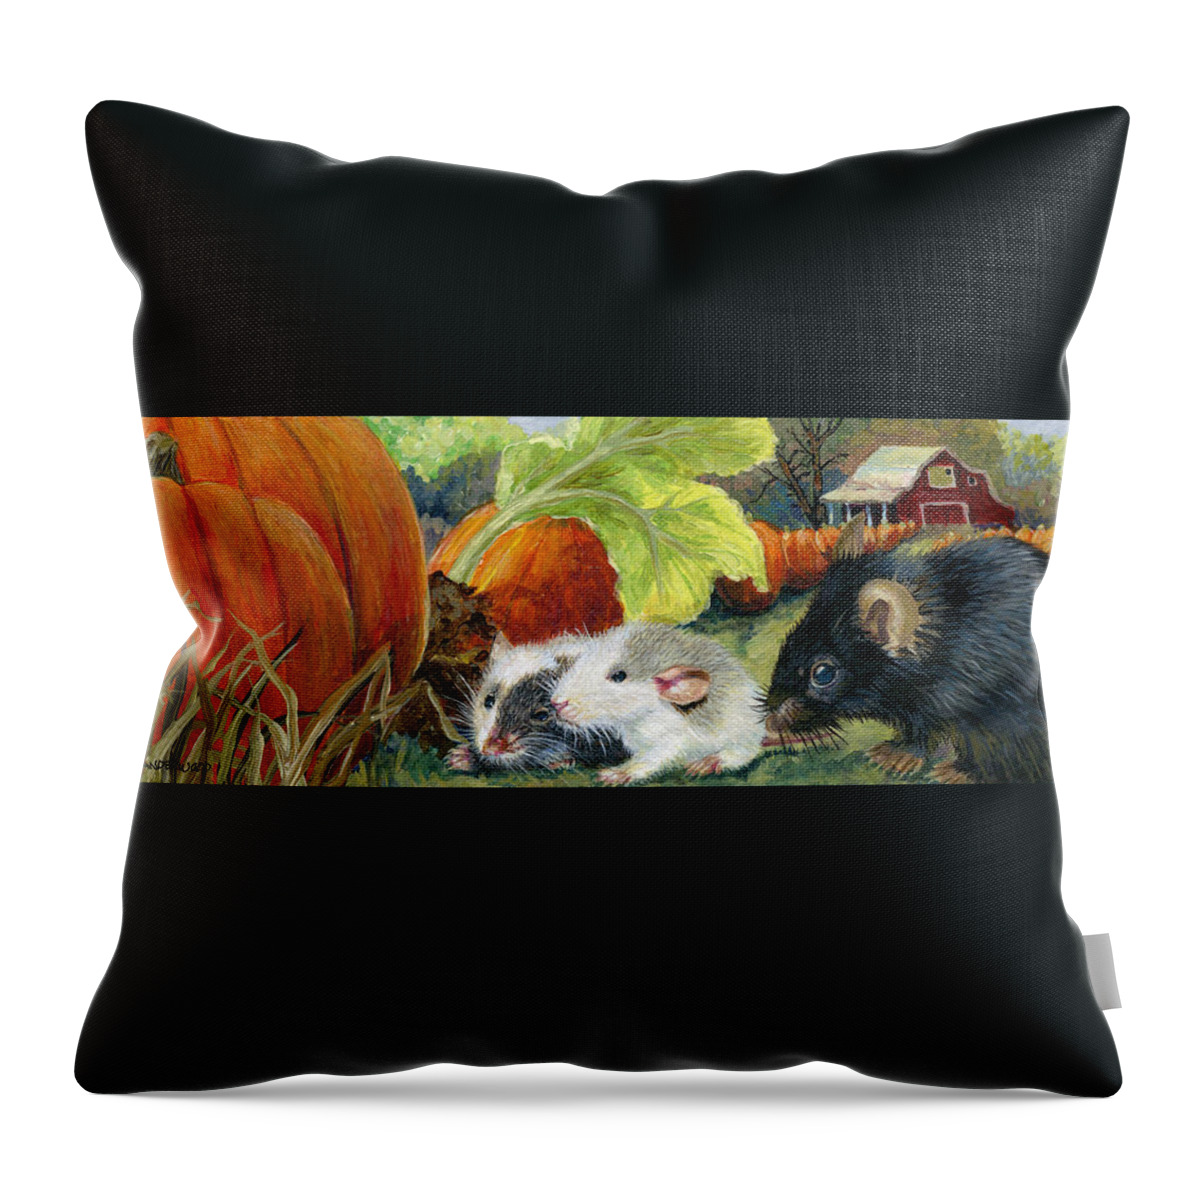 Mice Throw Pillow featuring the painting Baby's First Autumn by Jacquelin L Vanderwood Westerman